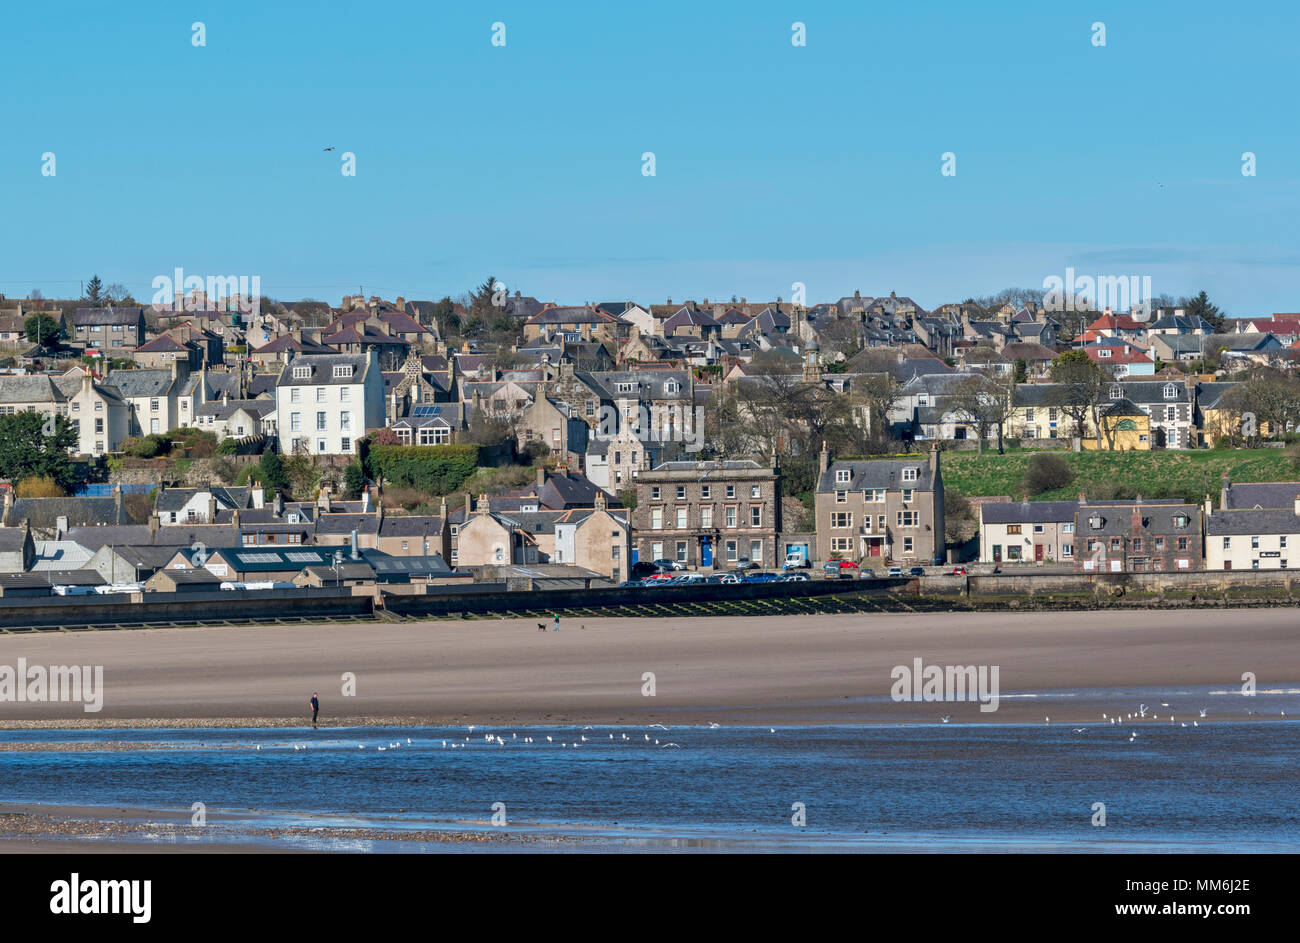 BANFF TOWN ABERDEENSHIRE SCOTLAND SEEN FROM ACROSS SANDS WHERE THE RIVER DEVERON ENTERS THE SEA PART TWO Stock Photo